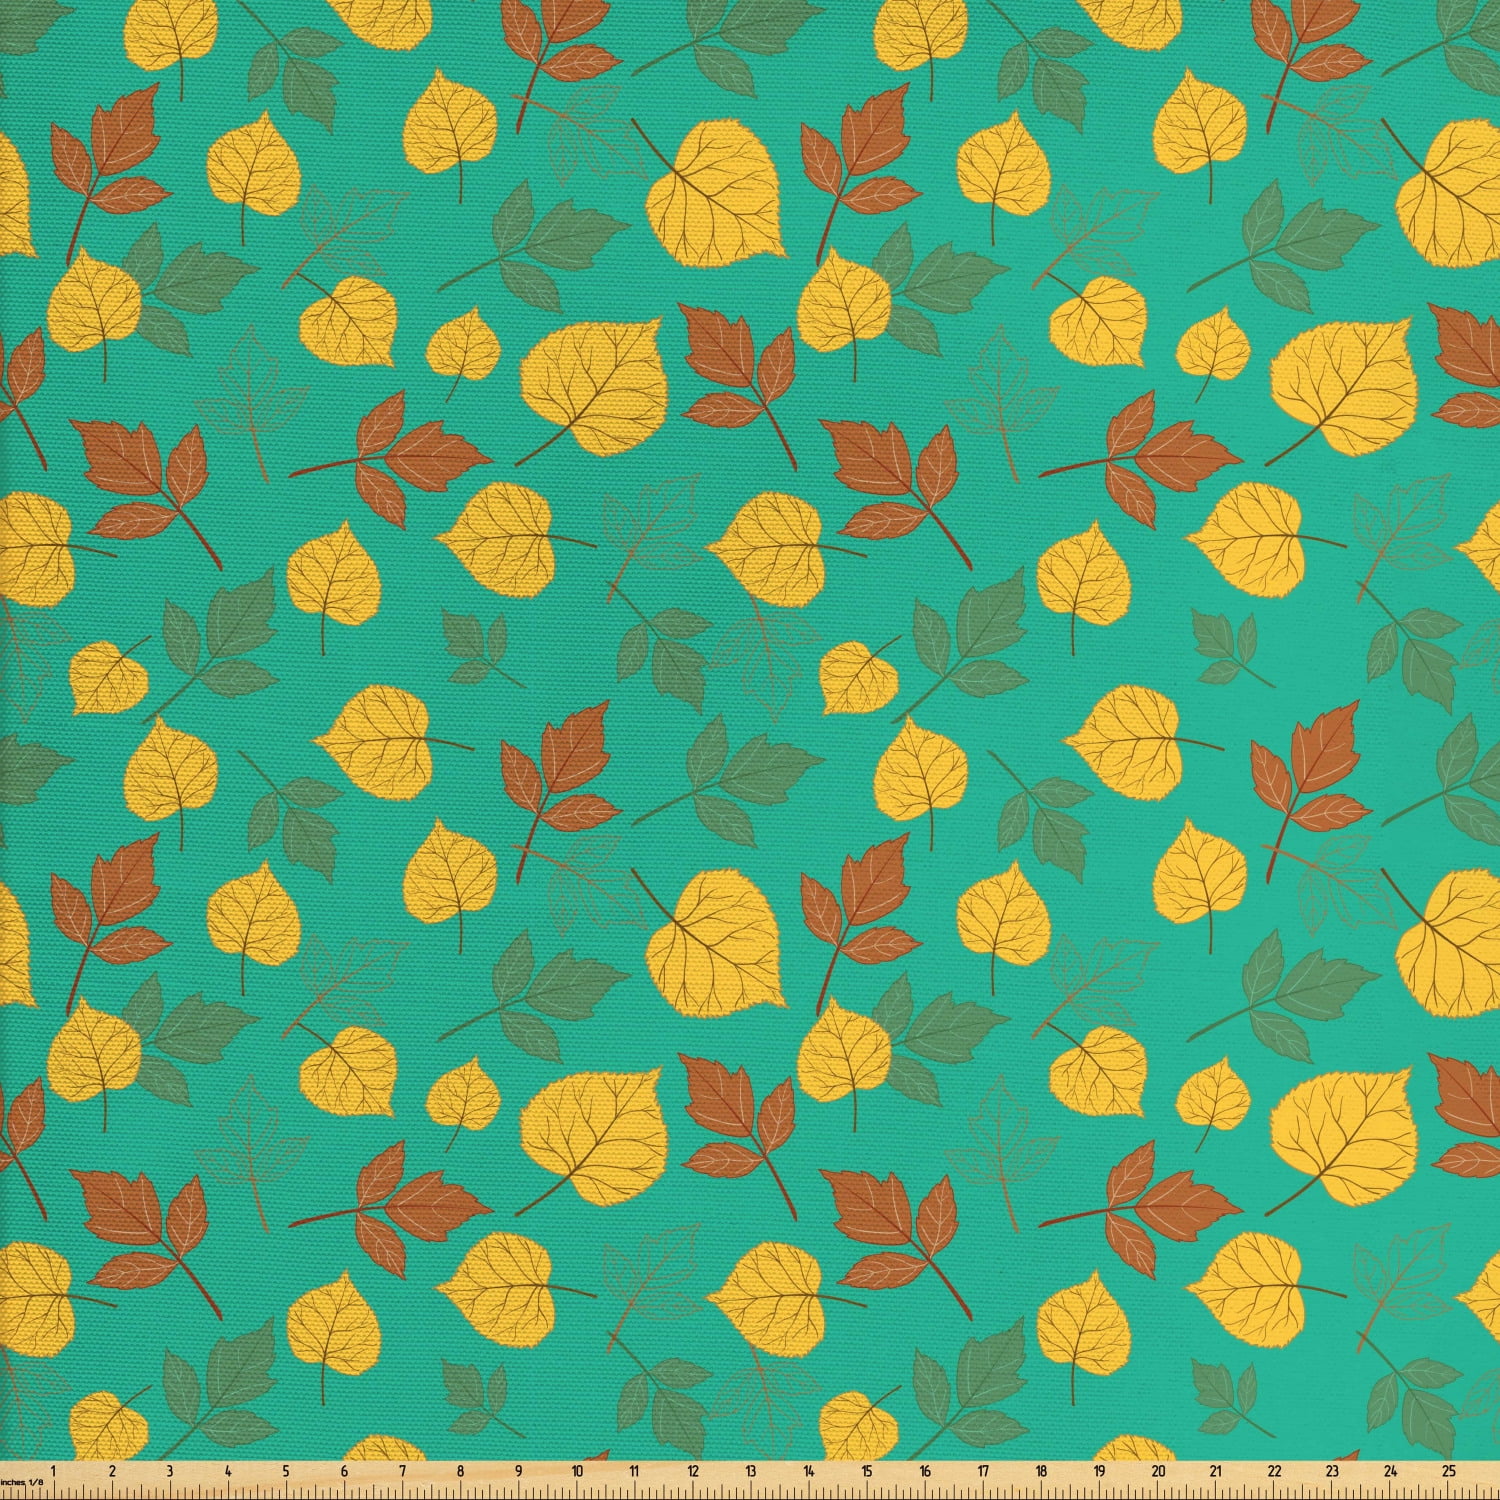 Country fabric crafting fabric decor fabric Quilting fabric Fall Leaves with acorns Sugar House by Thimbleberries for RJR Fashion Fabrics